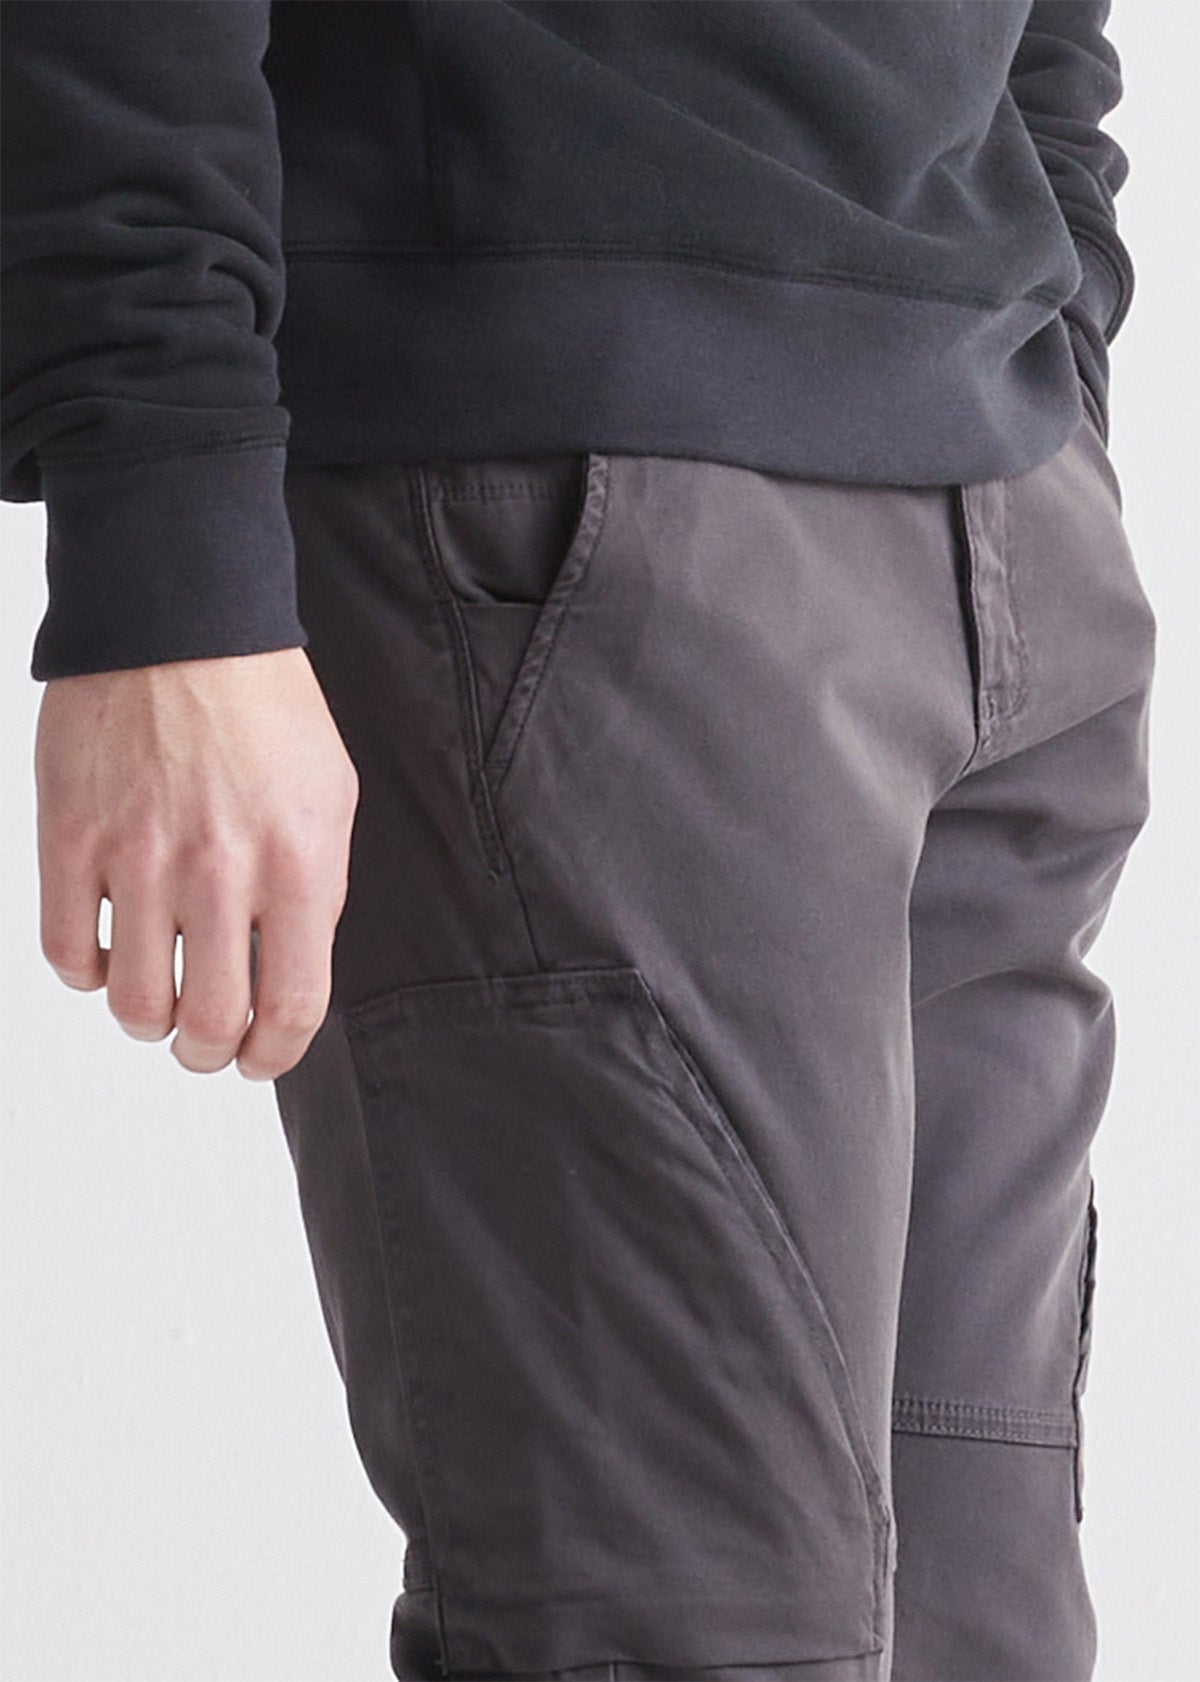 Gul Tyger Waterproof Breathable Dry Trousers